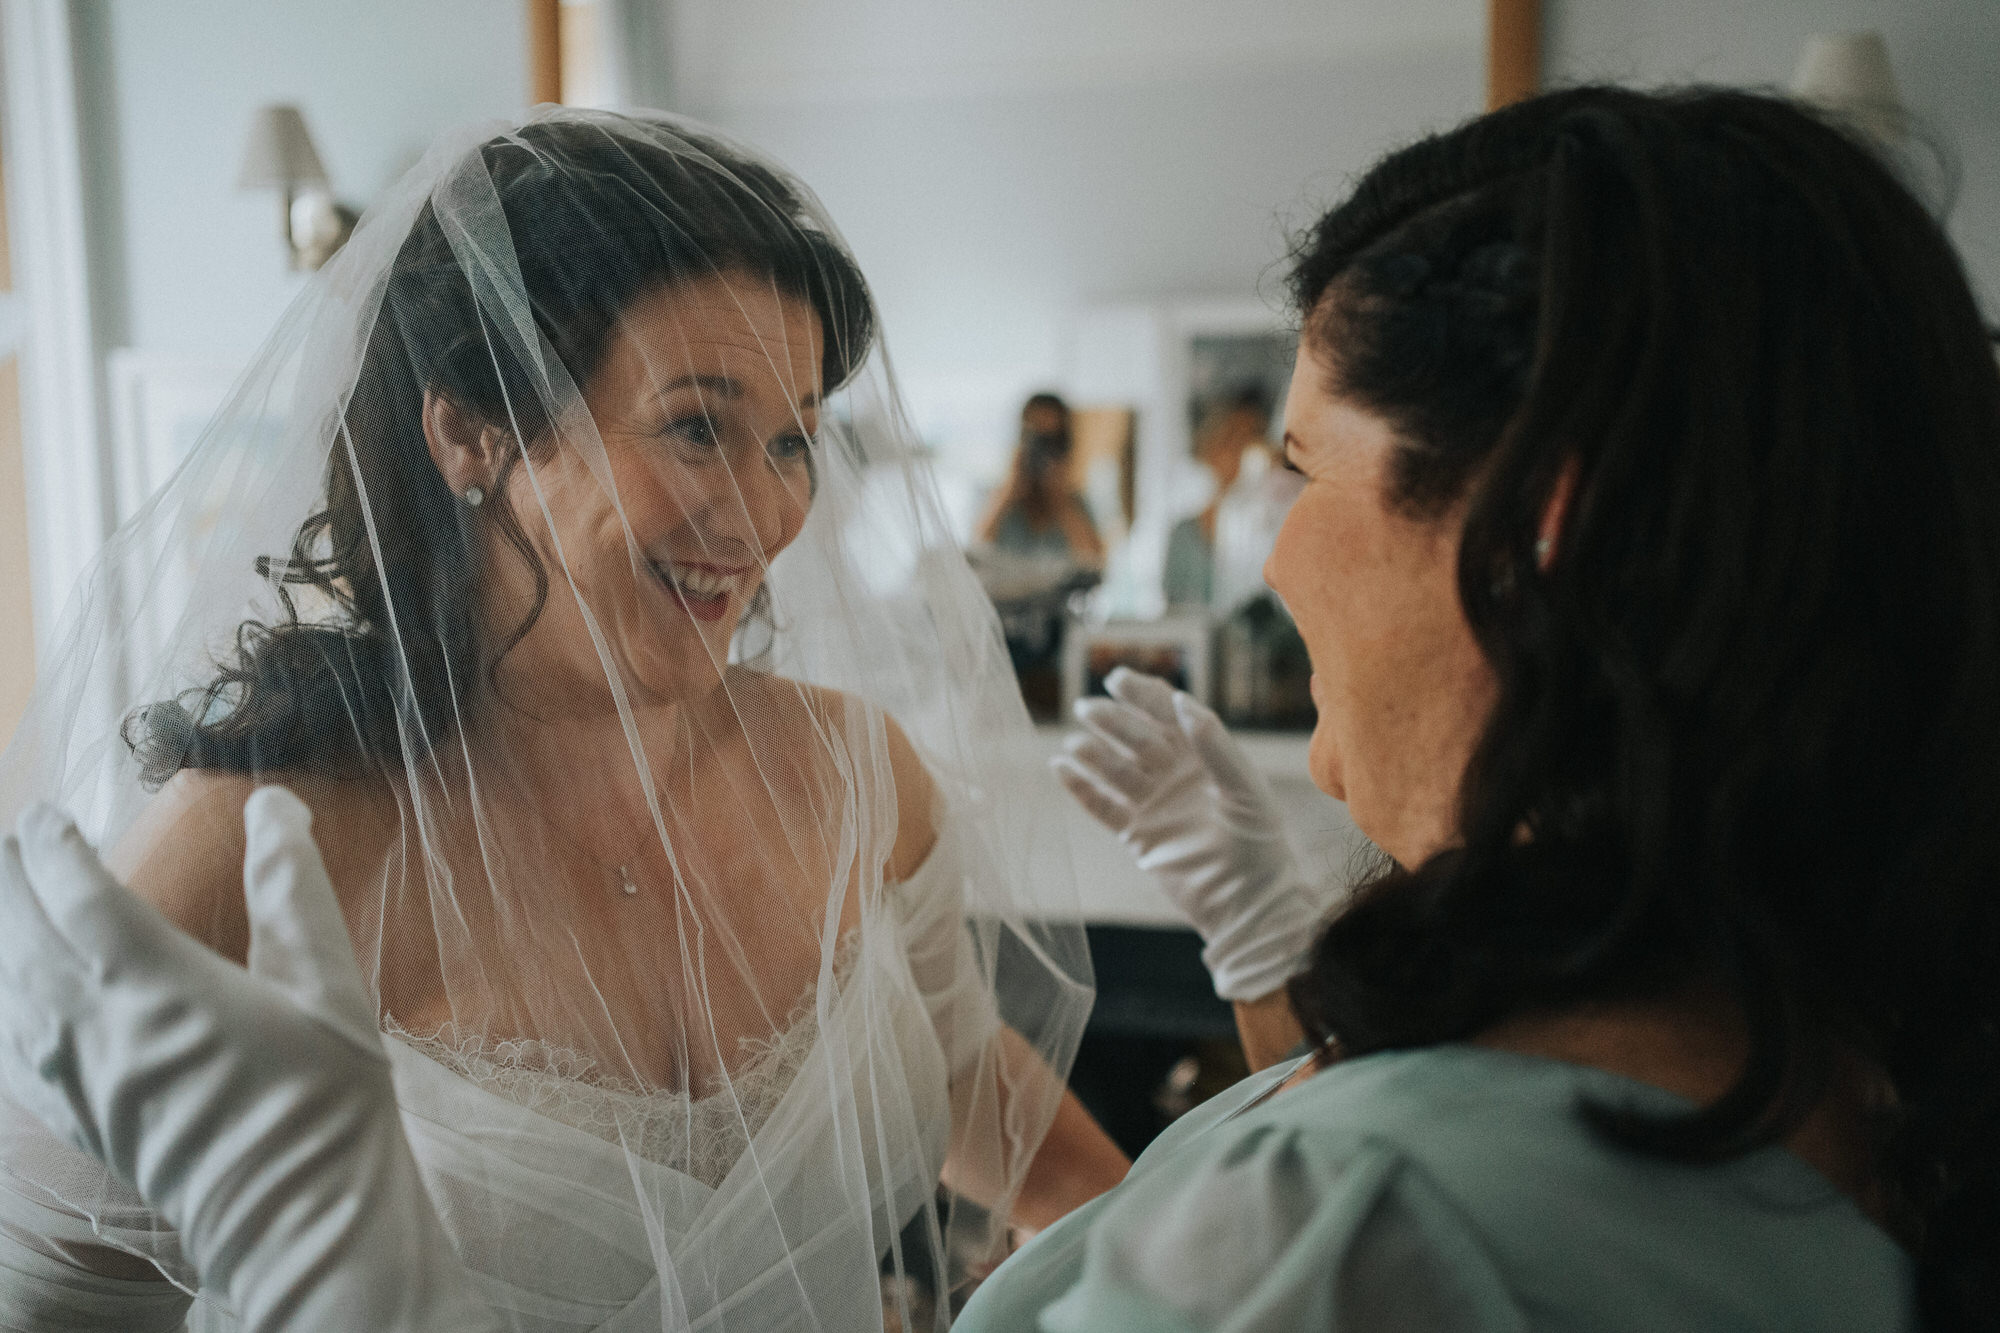 The bride laughs as she puts the veil over her head